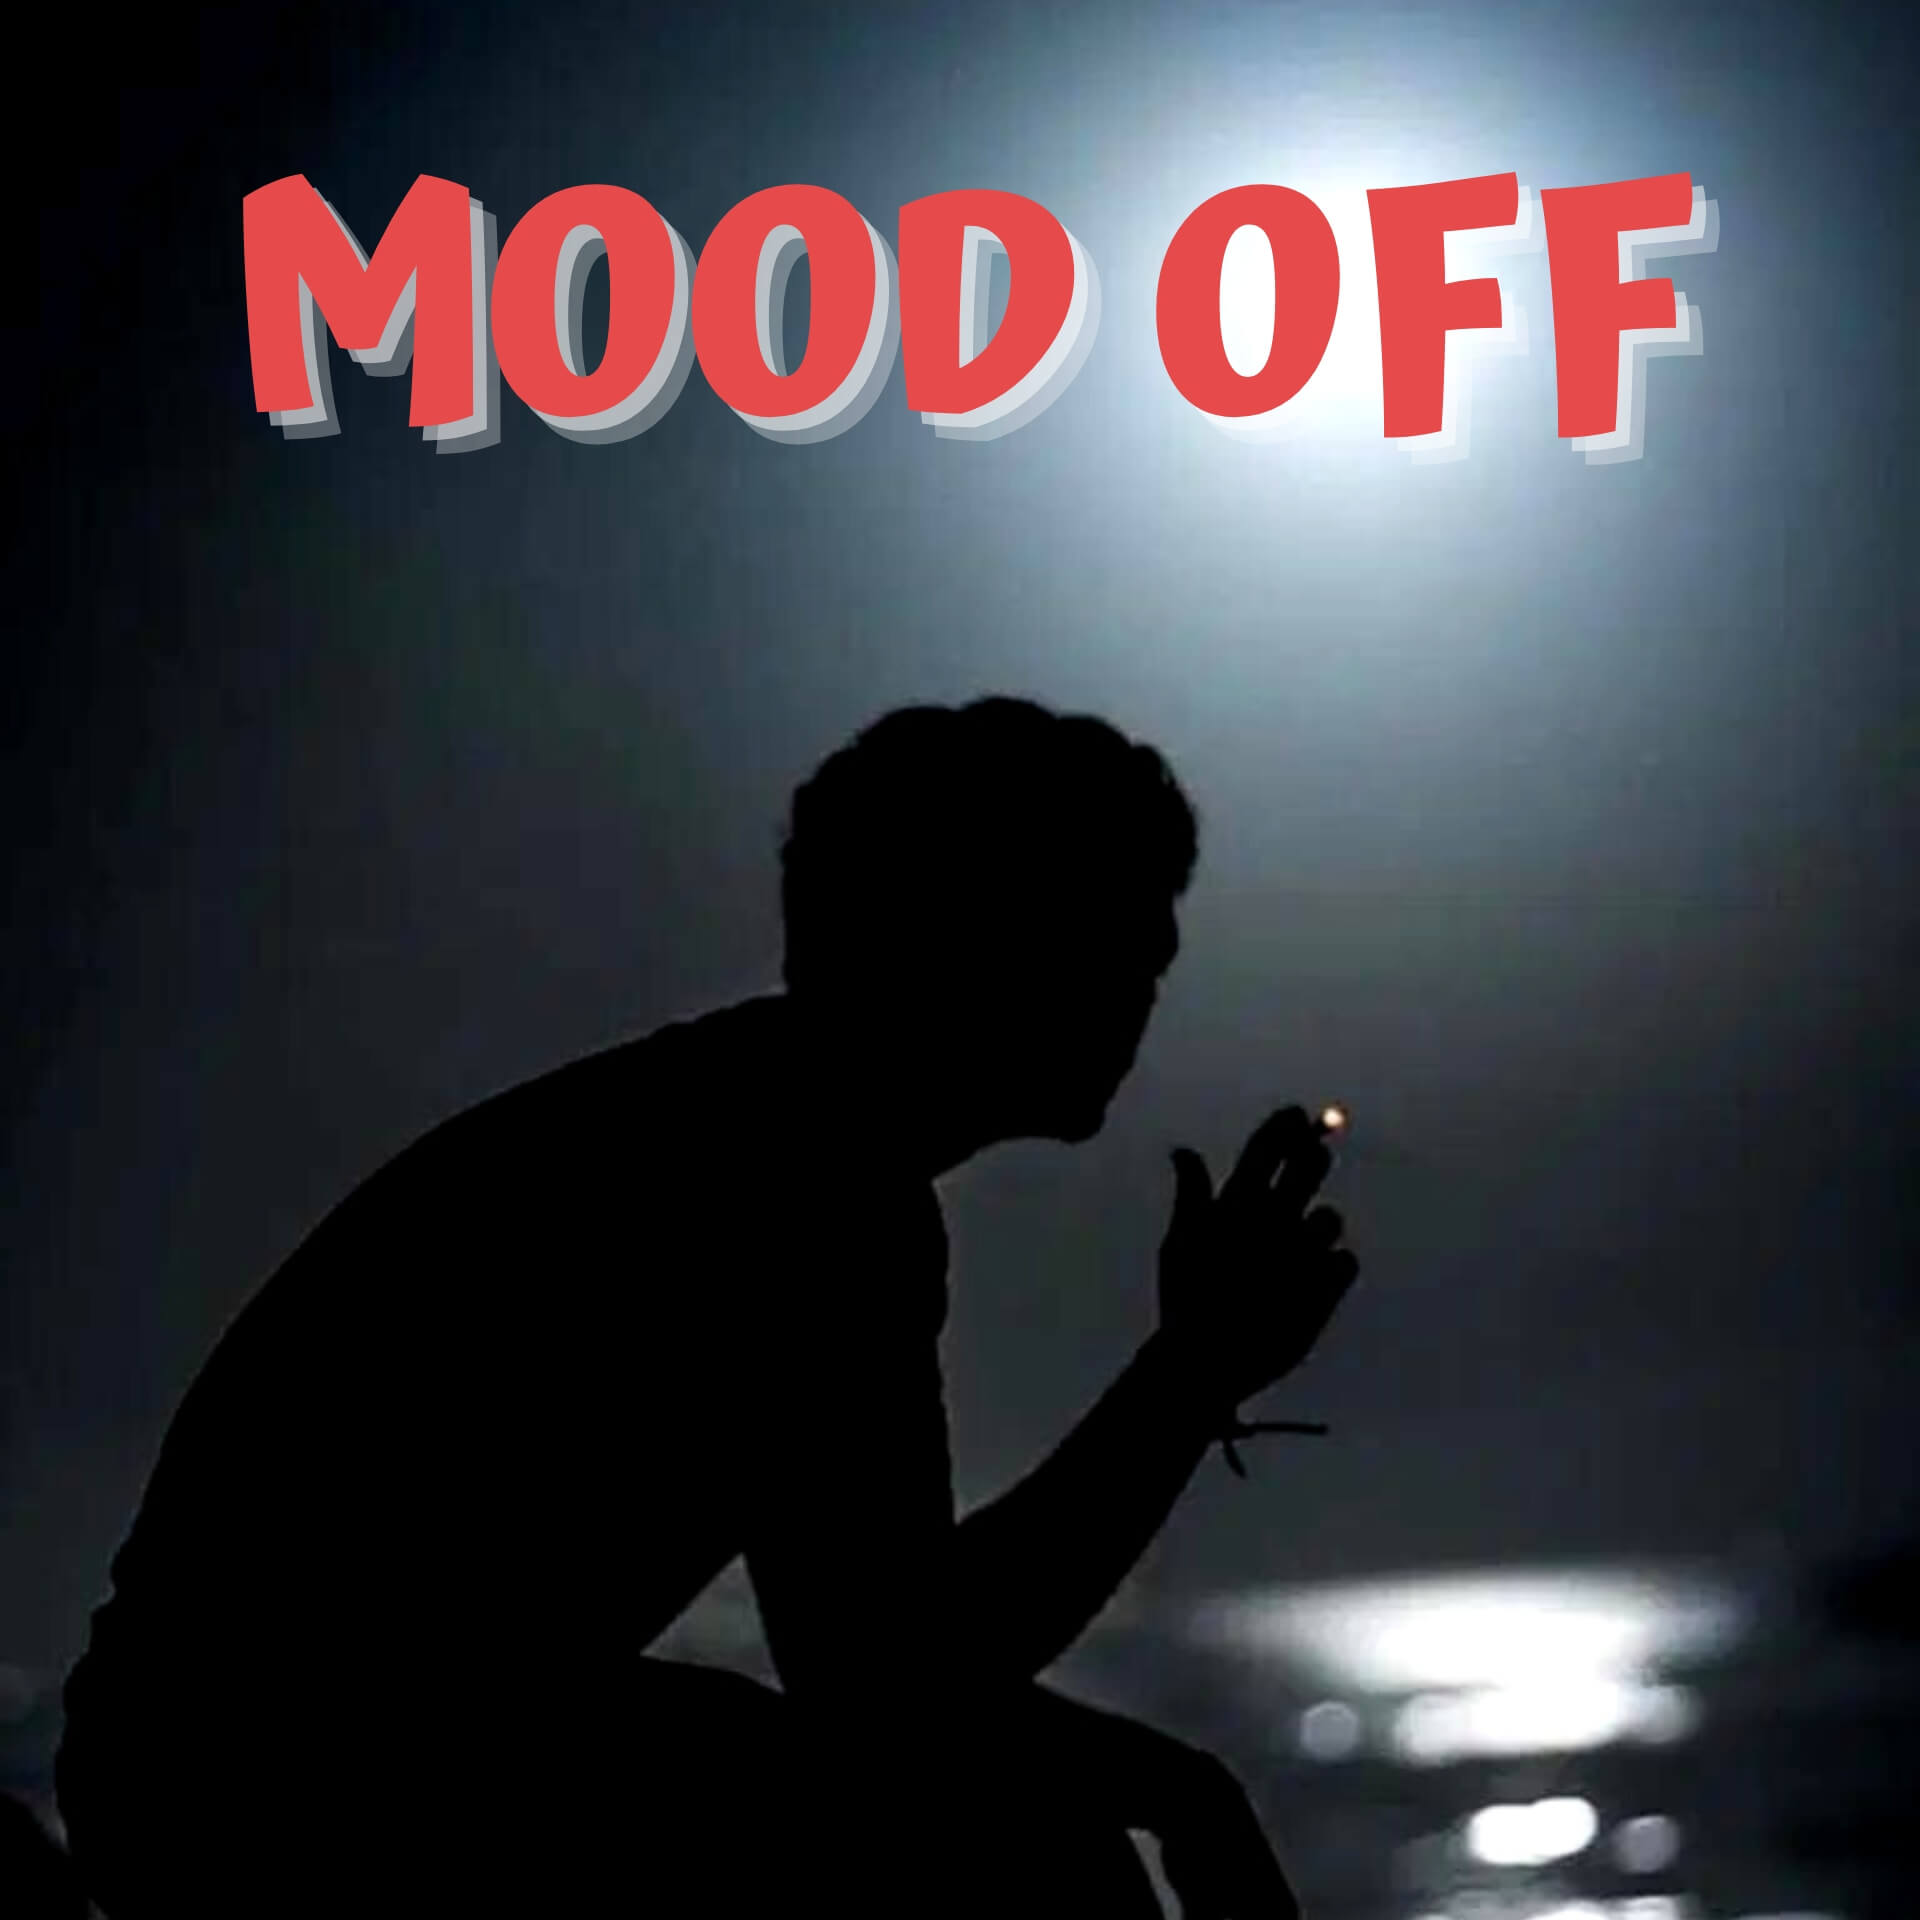 Top 100 Mood Off Dp For Whatsapp Images